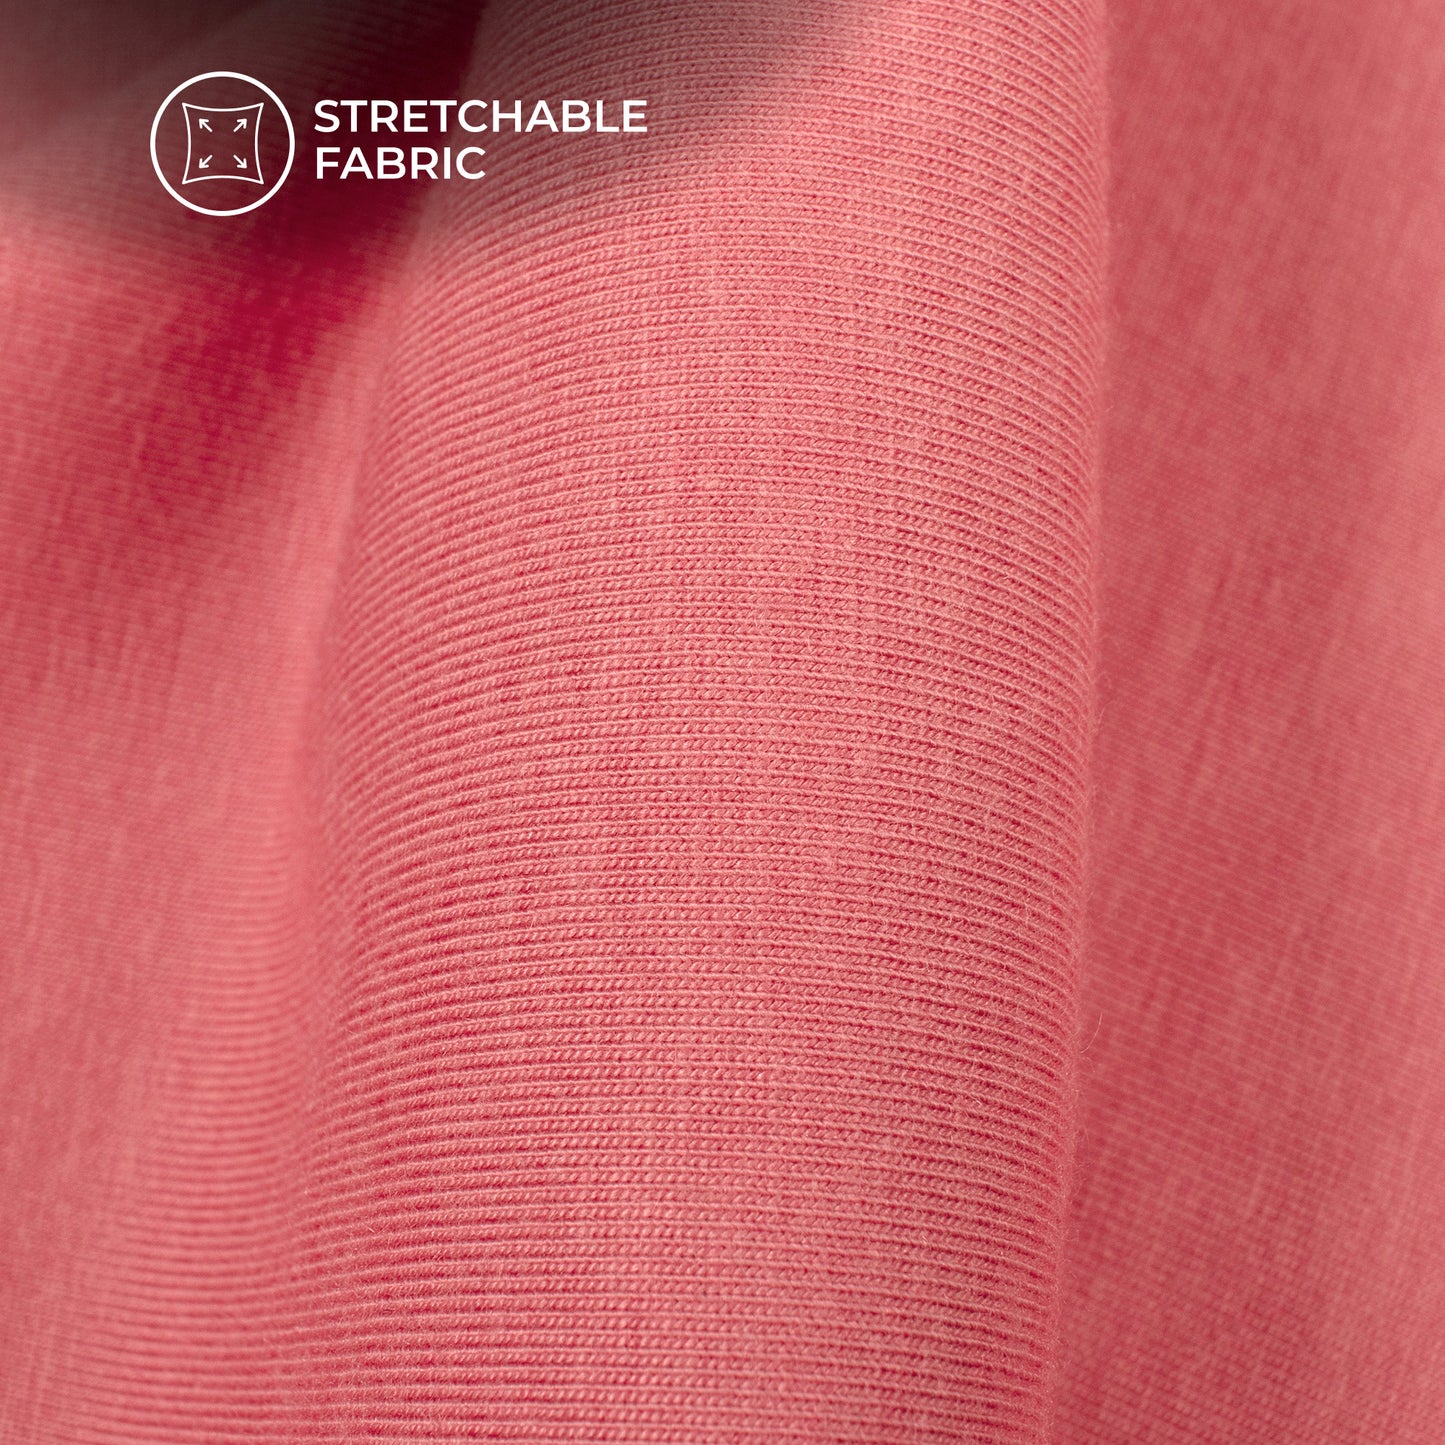 Watermelon Pink Stratched Modal Cotton Lycra Fabric (Width 70 Inches)